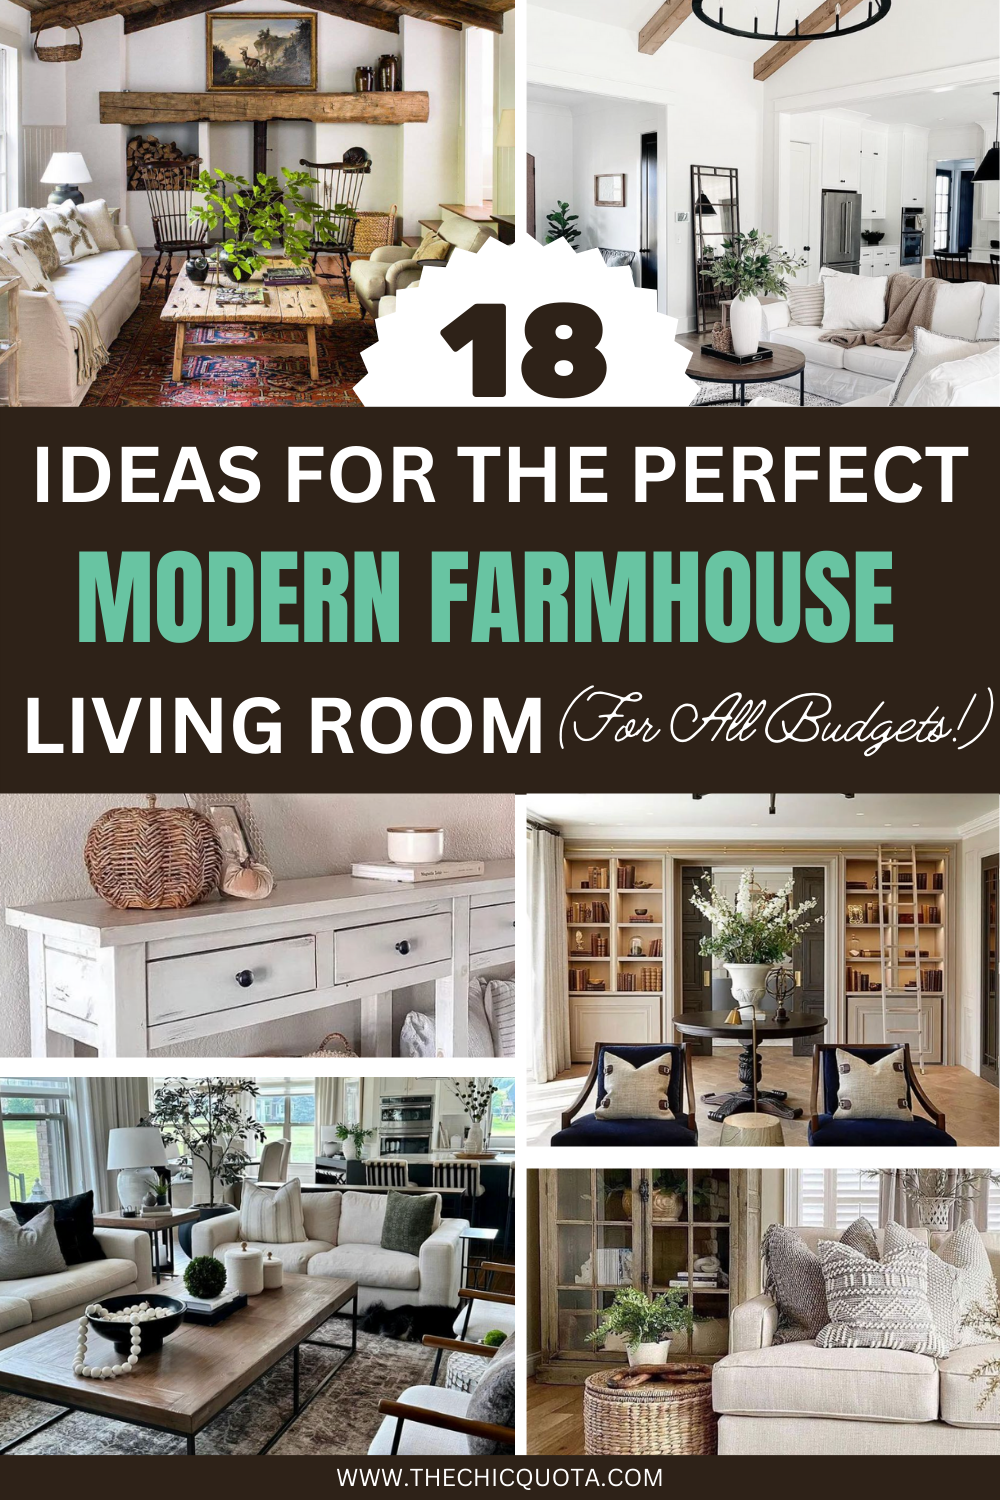 How To Design The Perfect Modern Farmhouse Living Room (18 Ideas For ...